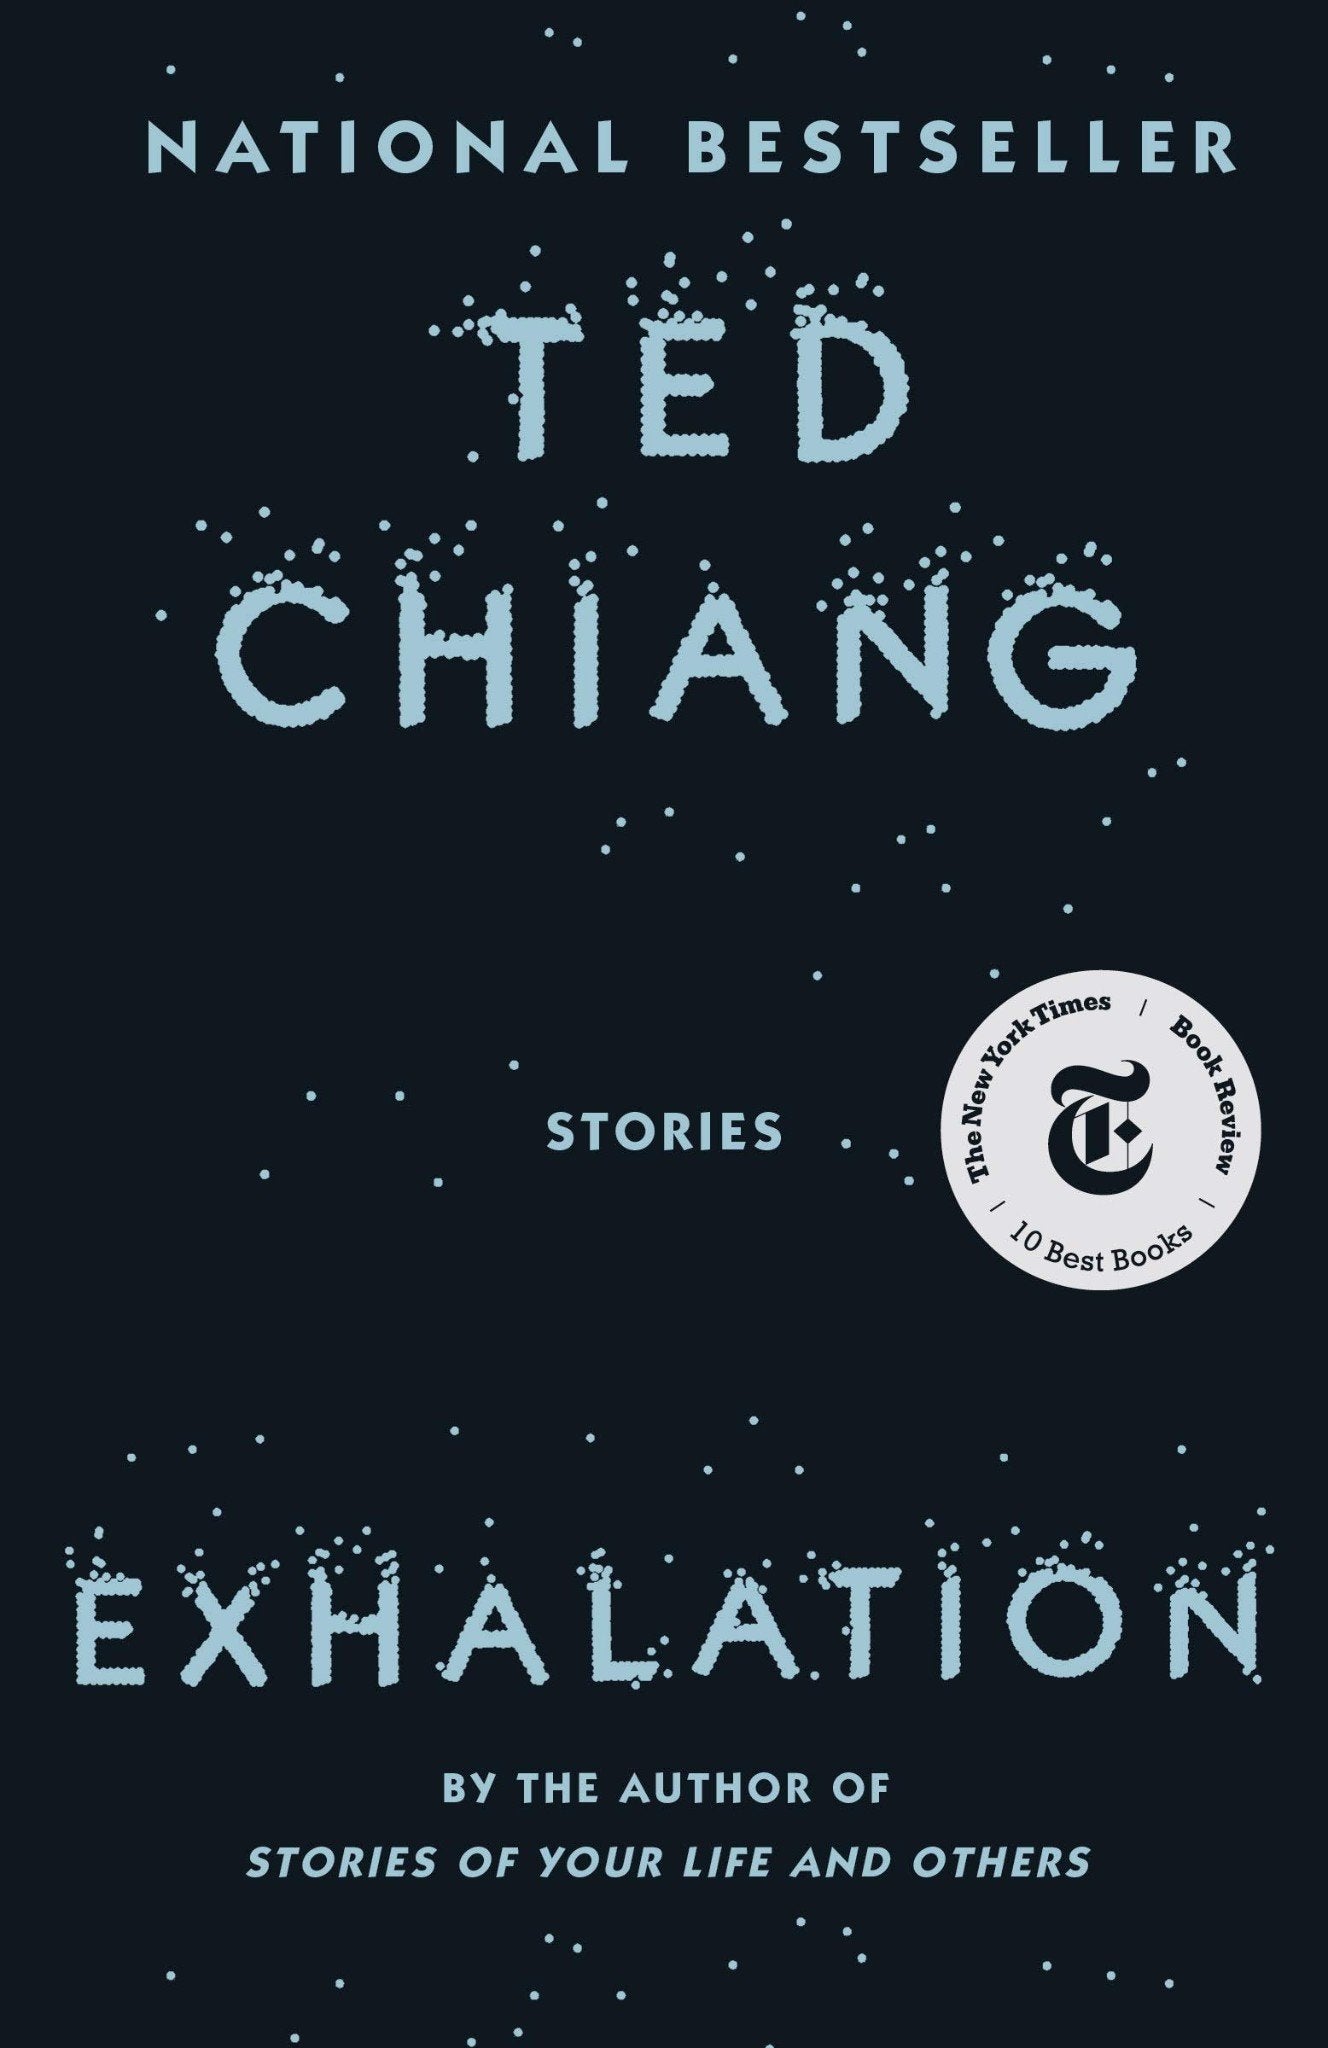 Exhalation: Stories by Ted Chiang (Paperback) 10 BEST BOOKS OF THE YEAR - LV'S Global Media